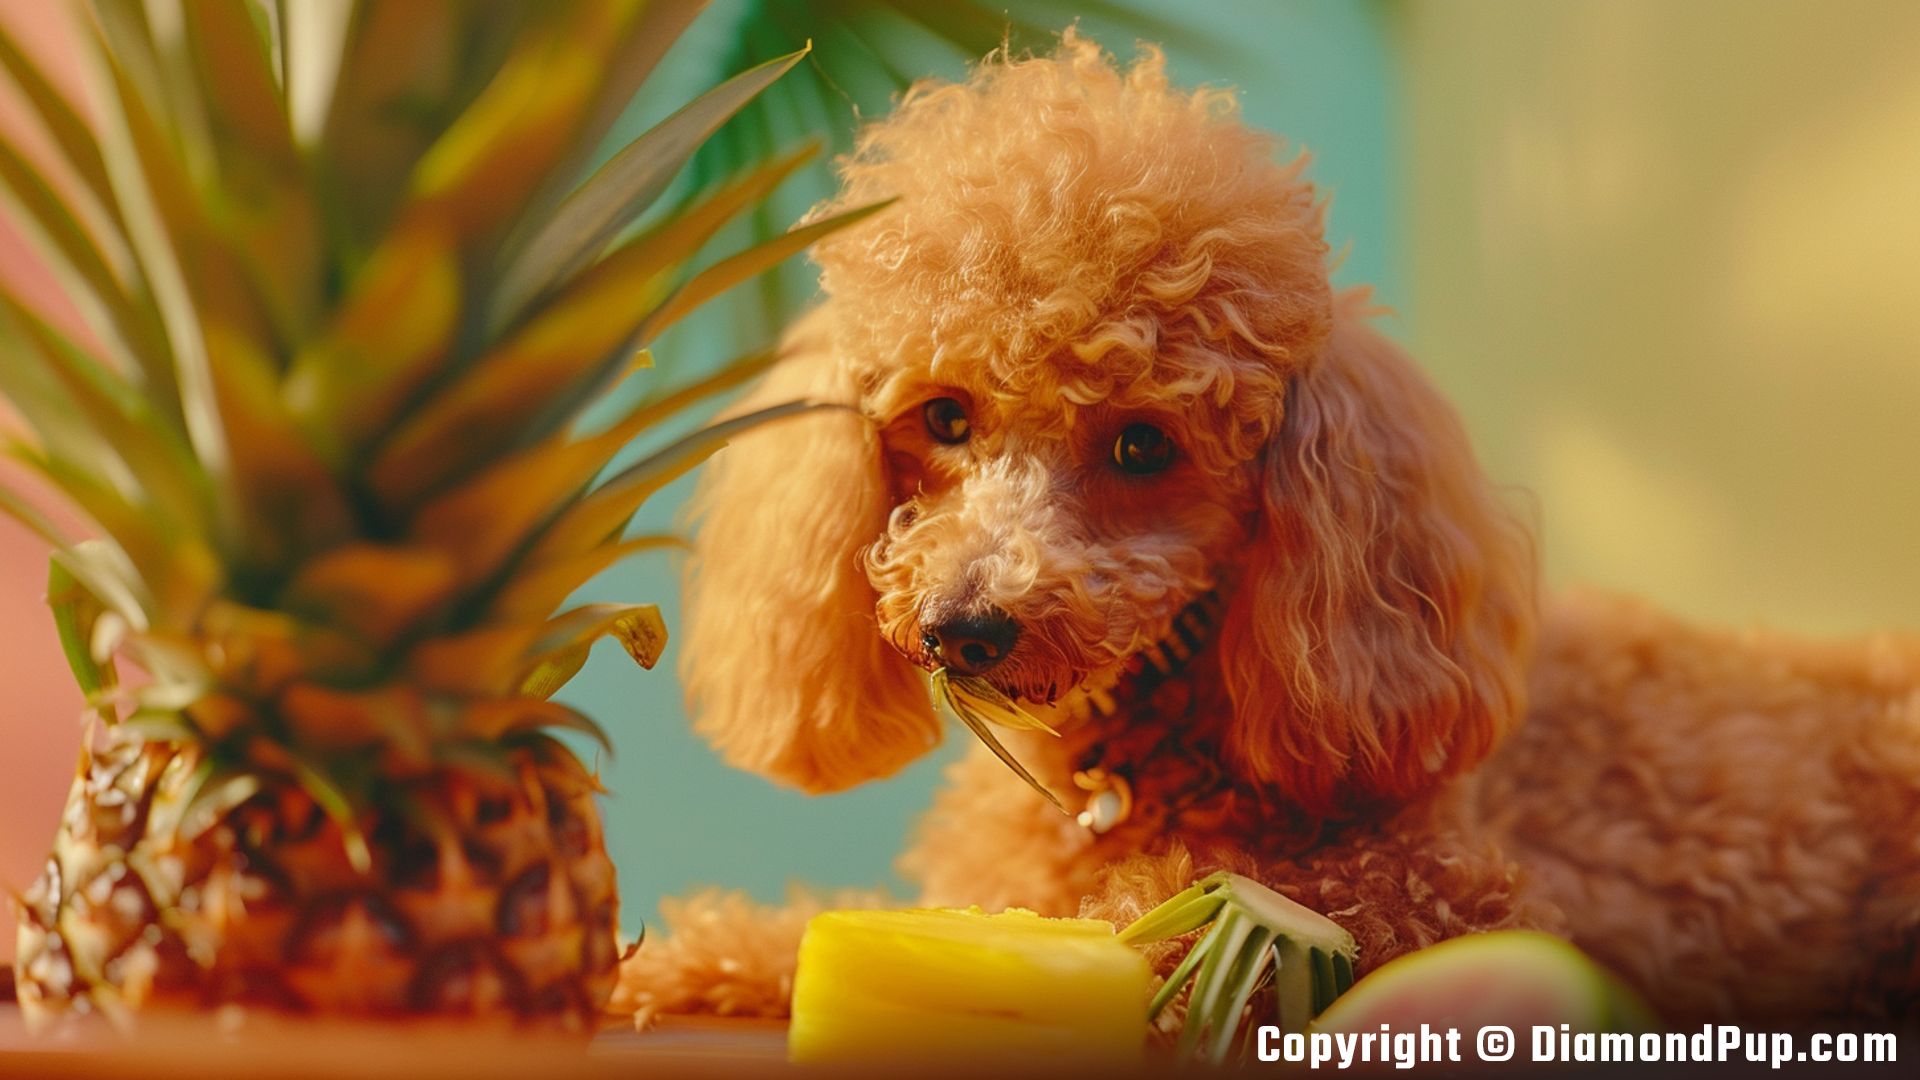 Photo of a Cute Poodle Snacking on Pineapple